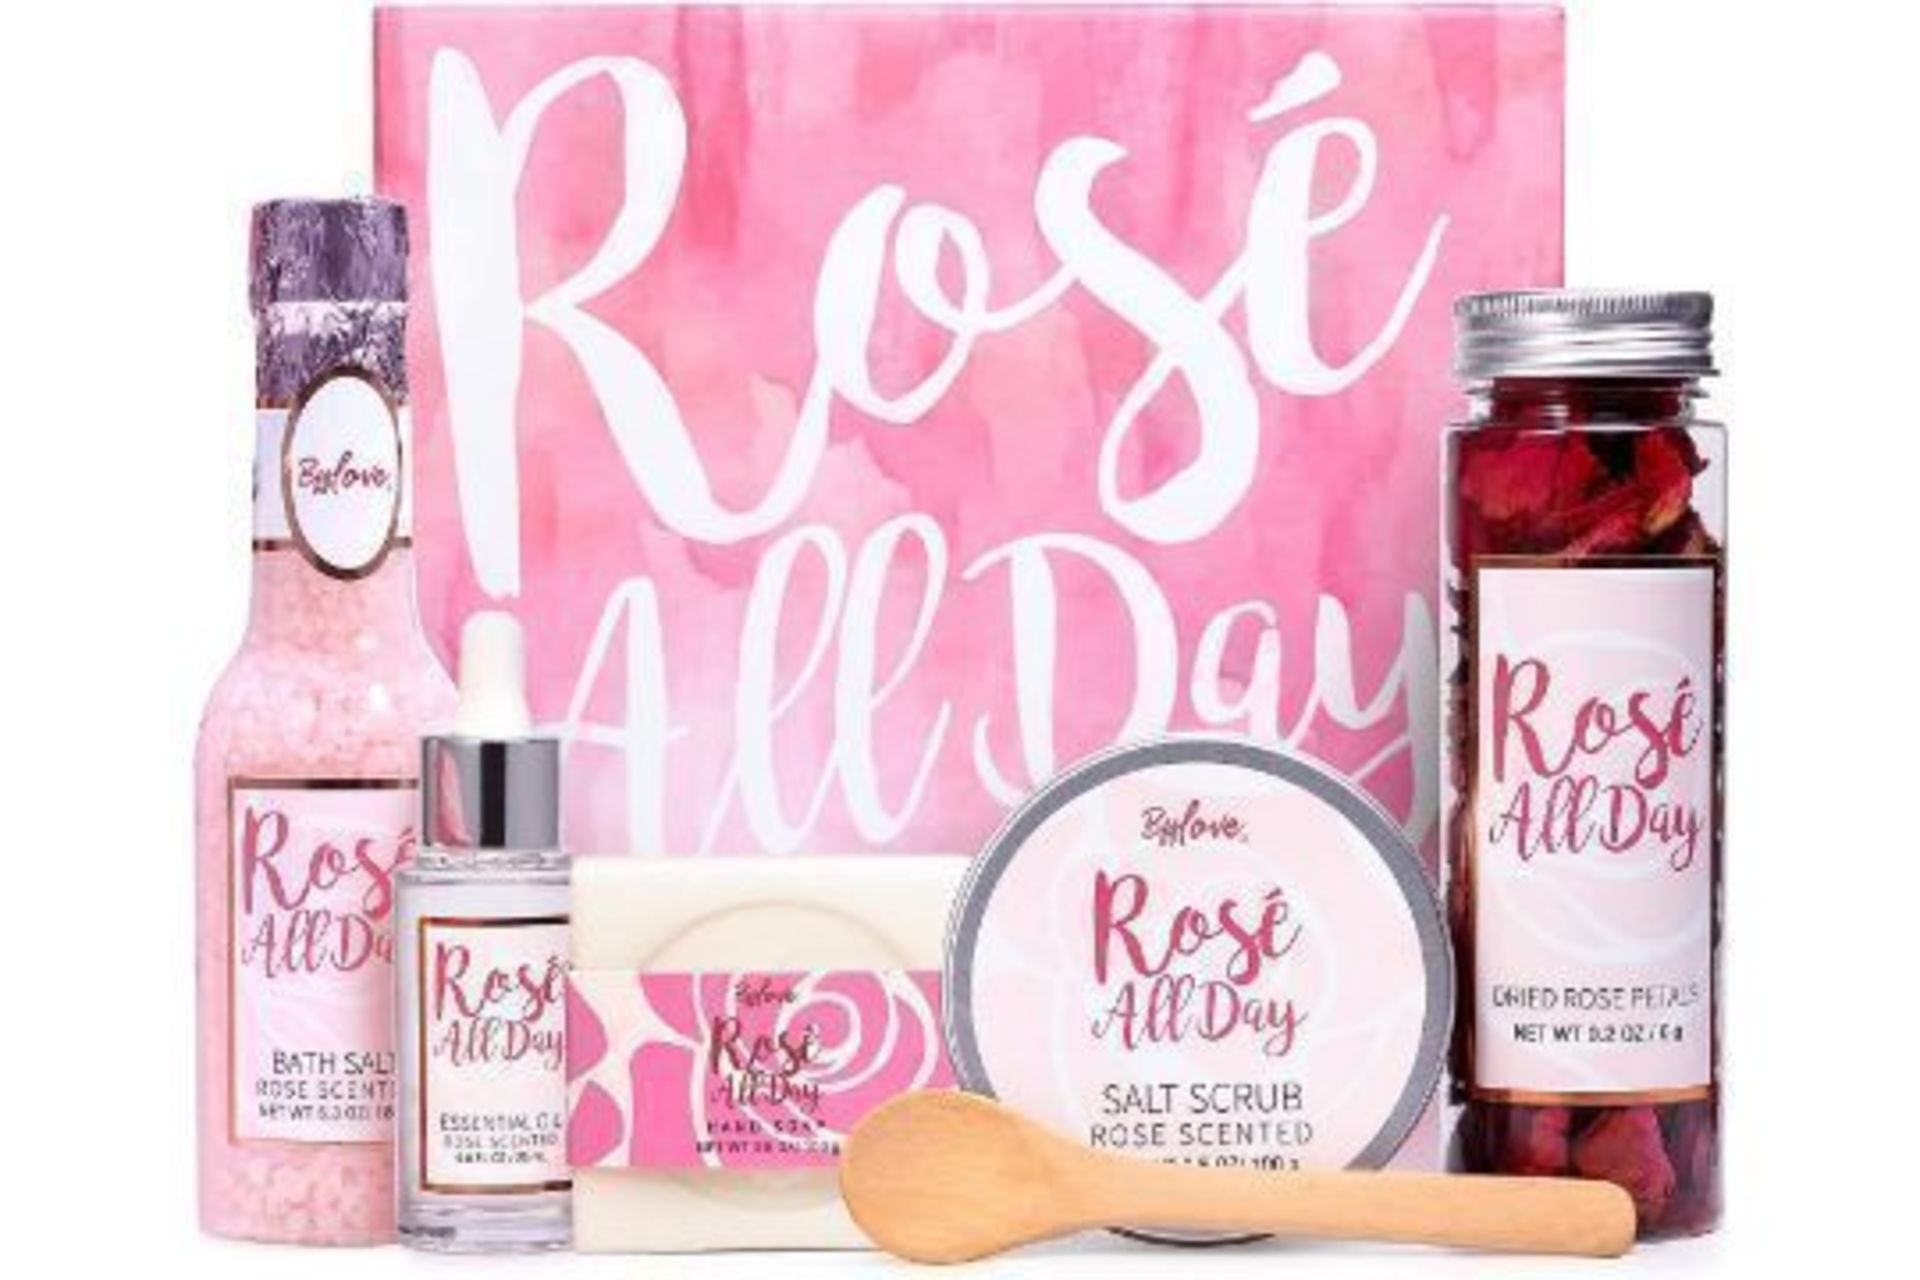 4 X NEW PACKAGED Rose All Day Bath Gift Box. (SKU:BFF-BP-11) Best Gift Set for Women - Our spa